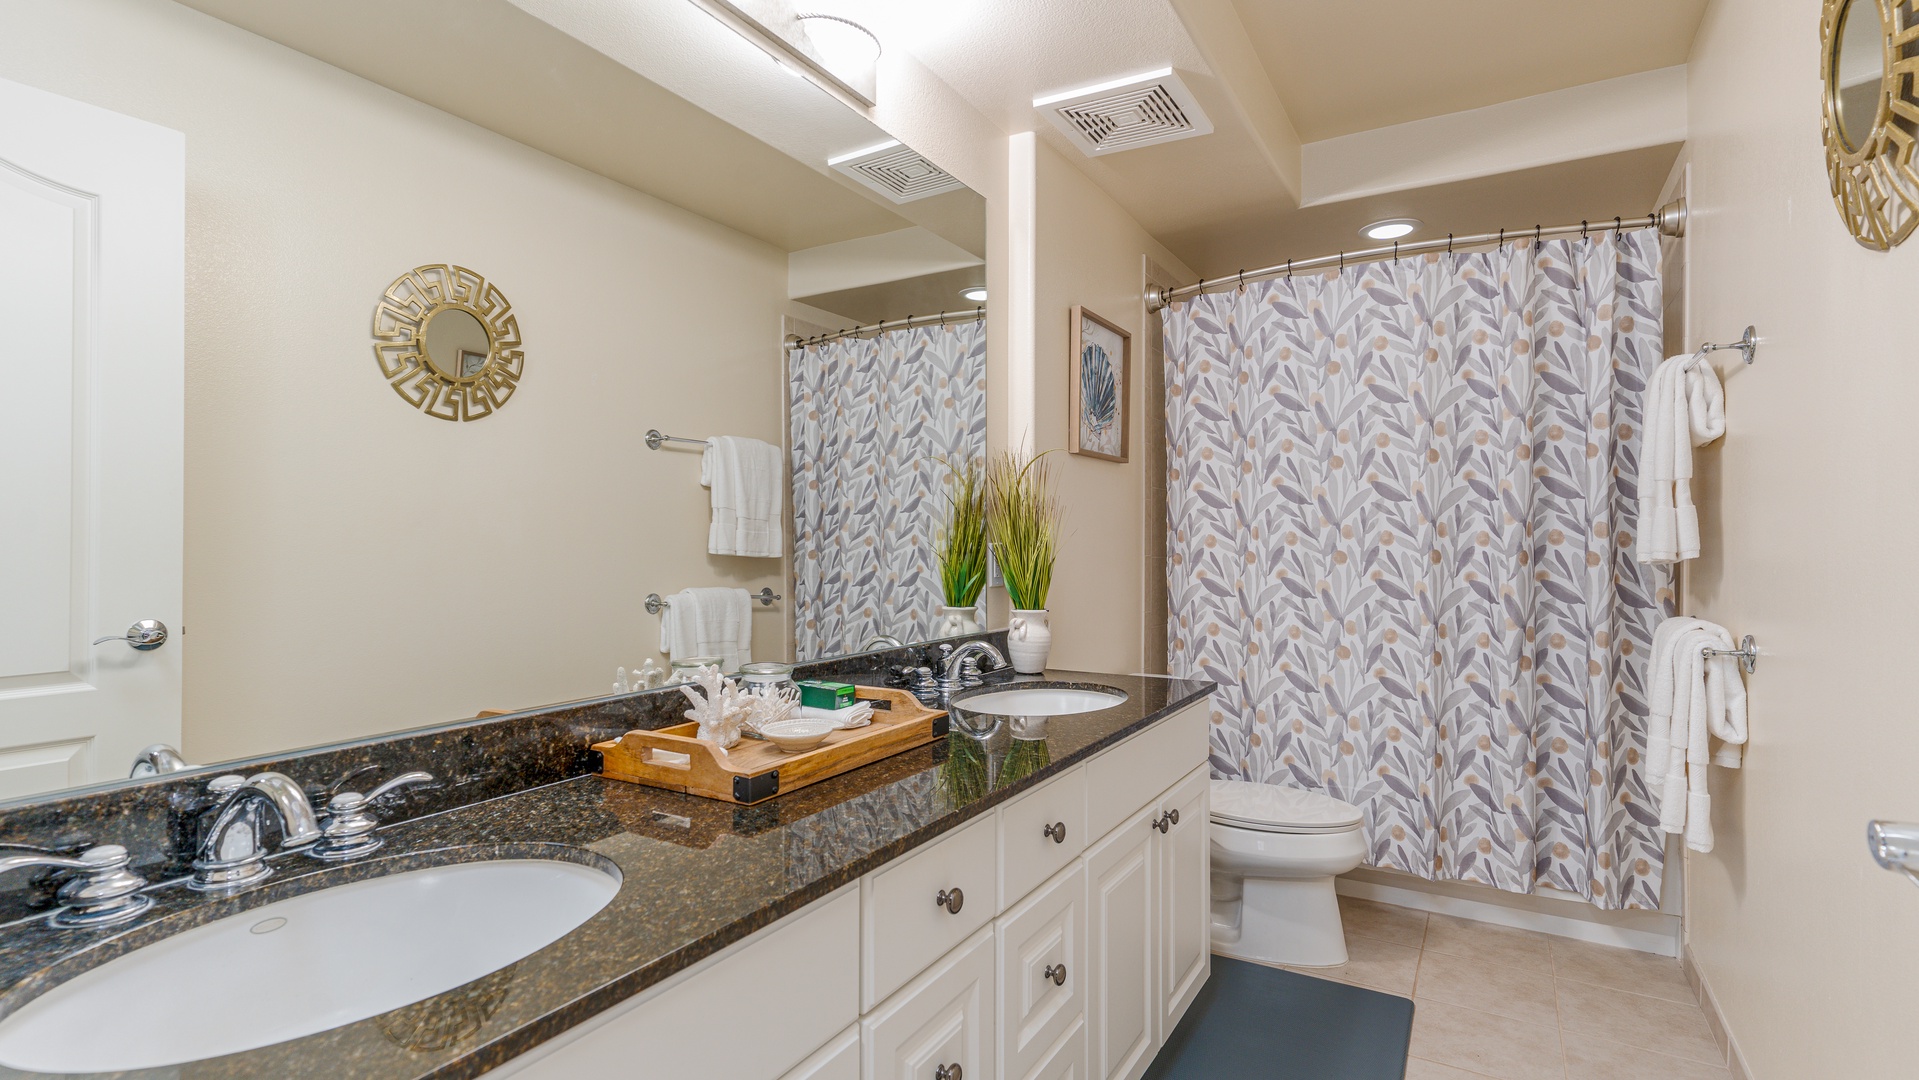 Kapolei Vacation Rentals, Ko Olina Kai 1027A - The primary guest bathroom with a double vanity and shower.